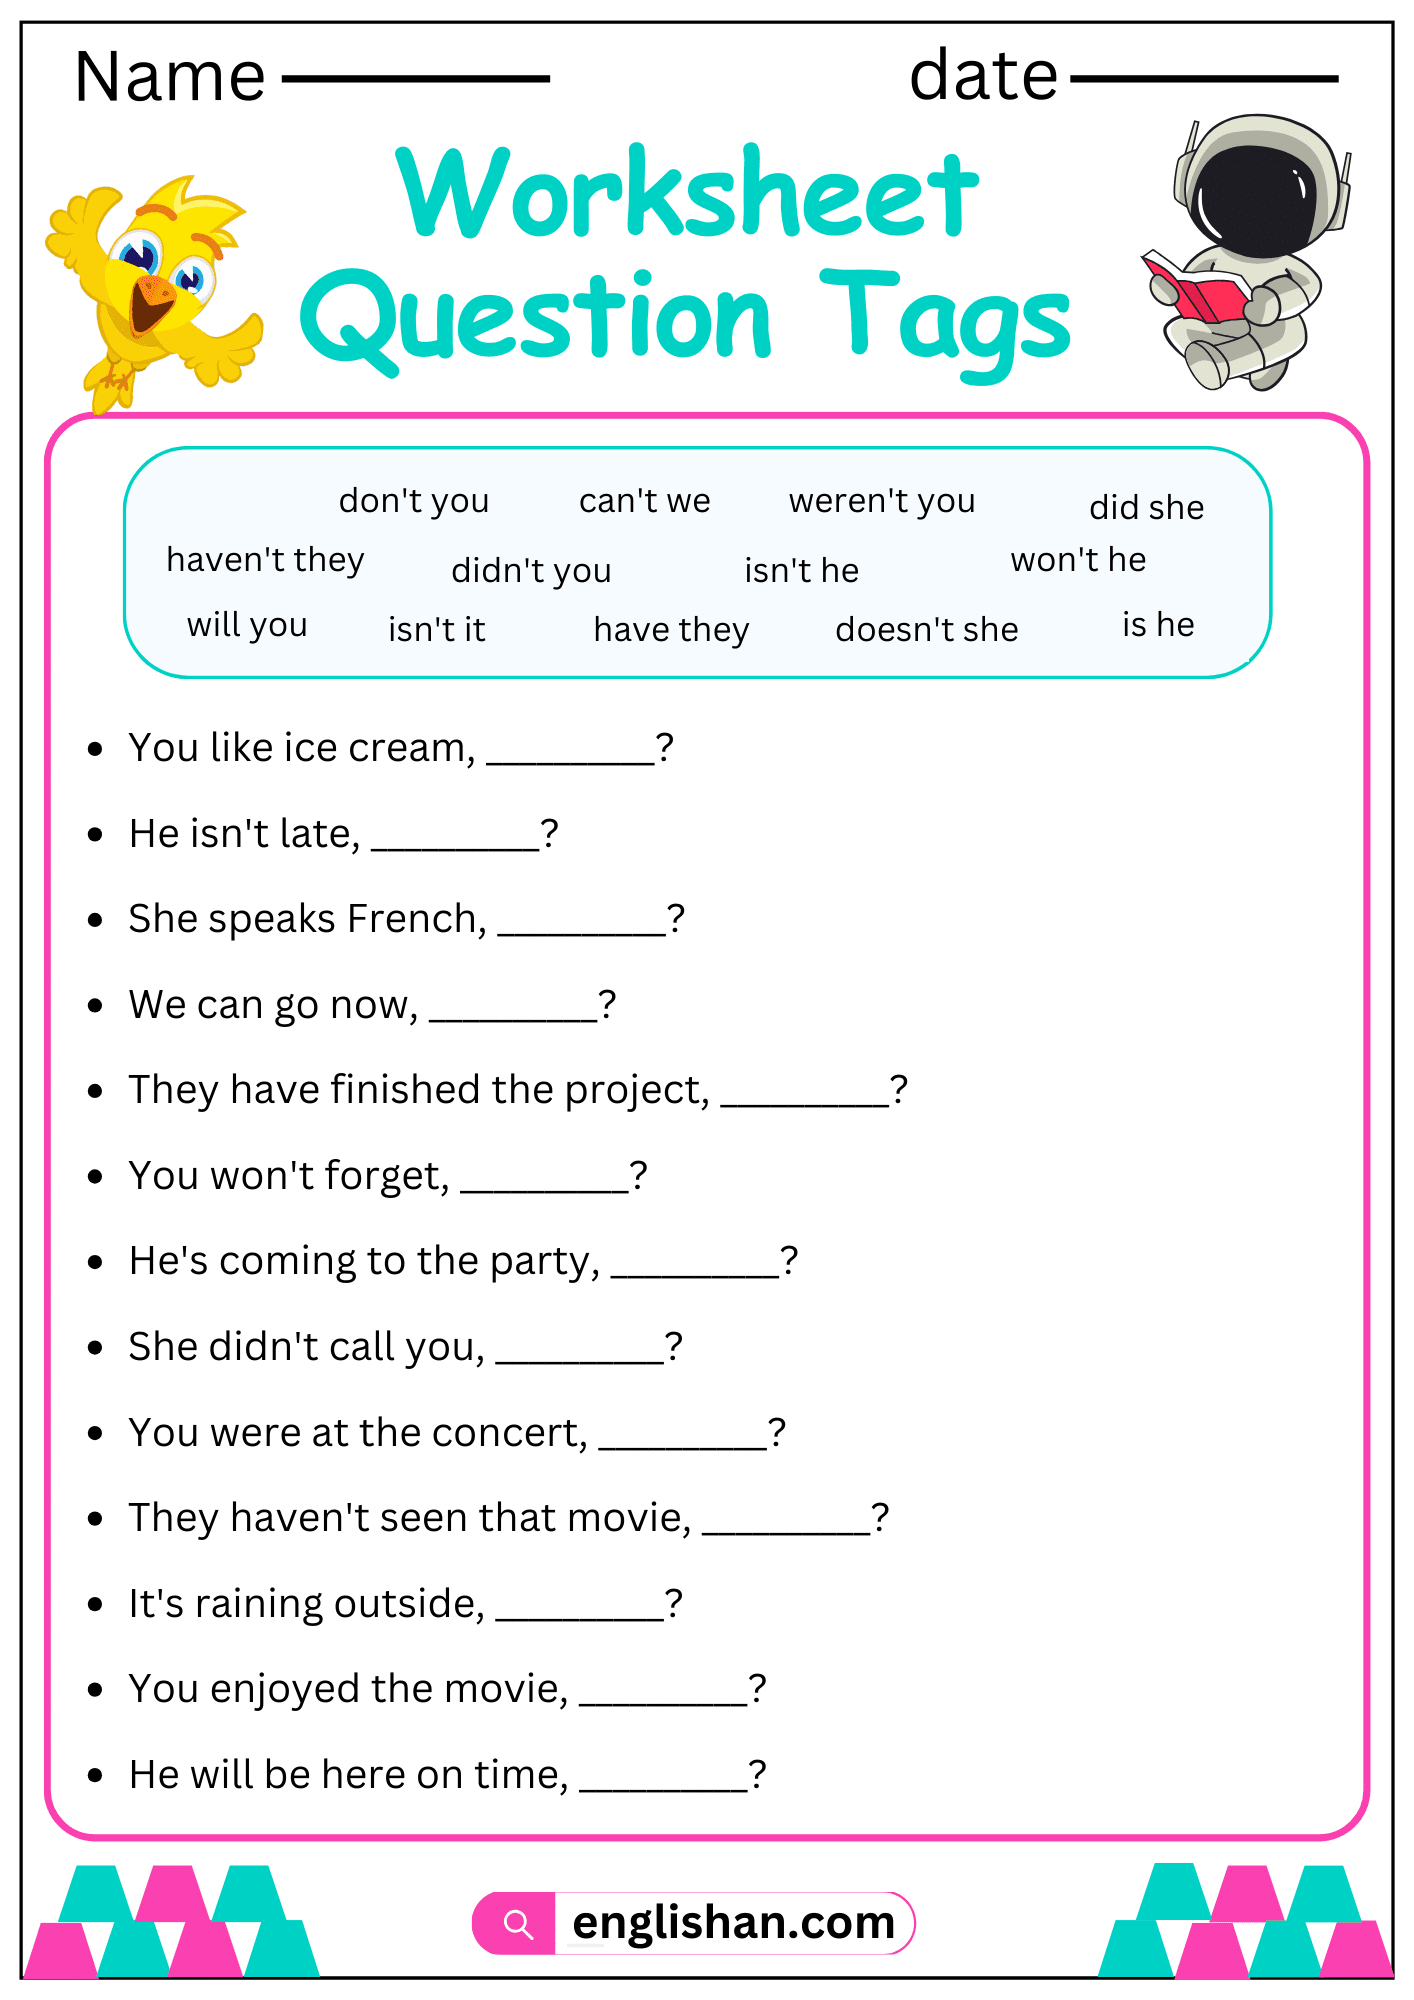 30 Sentences by using Question Tags Worksheet. How to use and Identify Question Tags. Question Tags Worksheets and Exercises